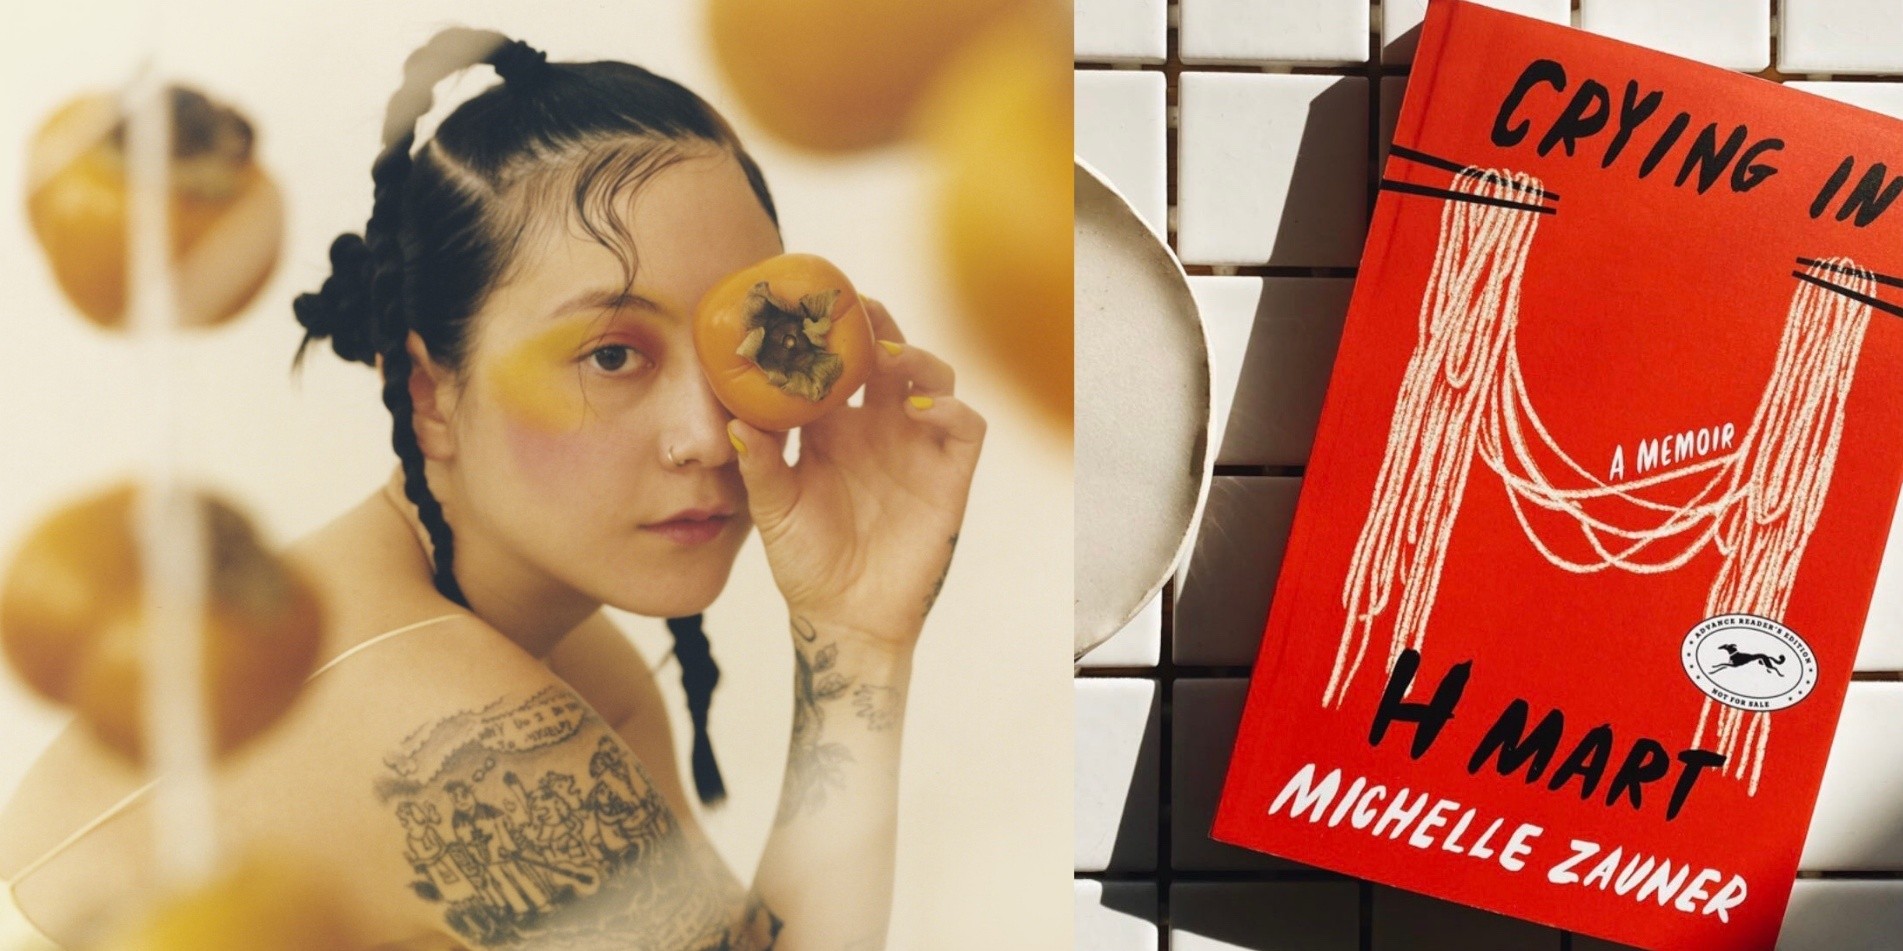 Japanese Breakfast's memoir 'Crying in H Mart' to be adapted into a film for MGM's Orion Pictures